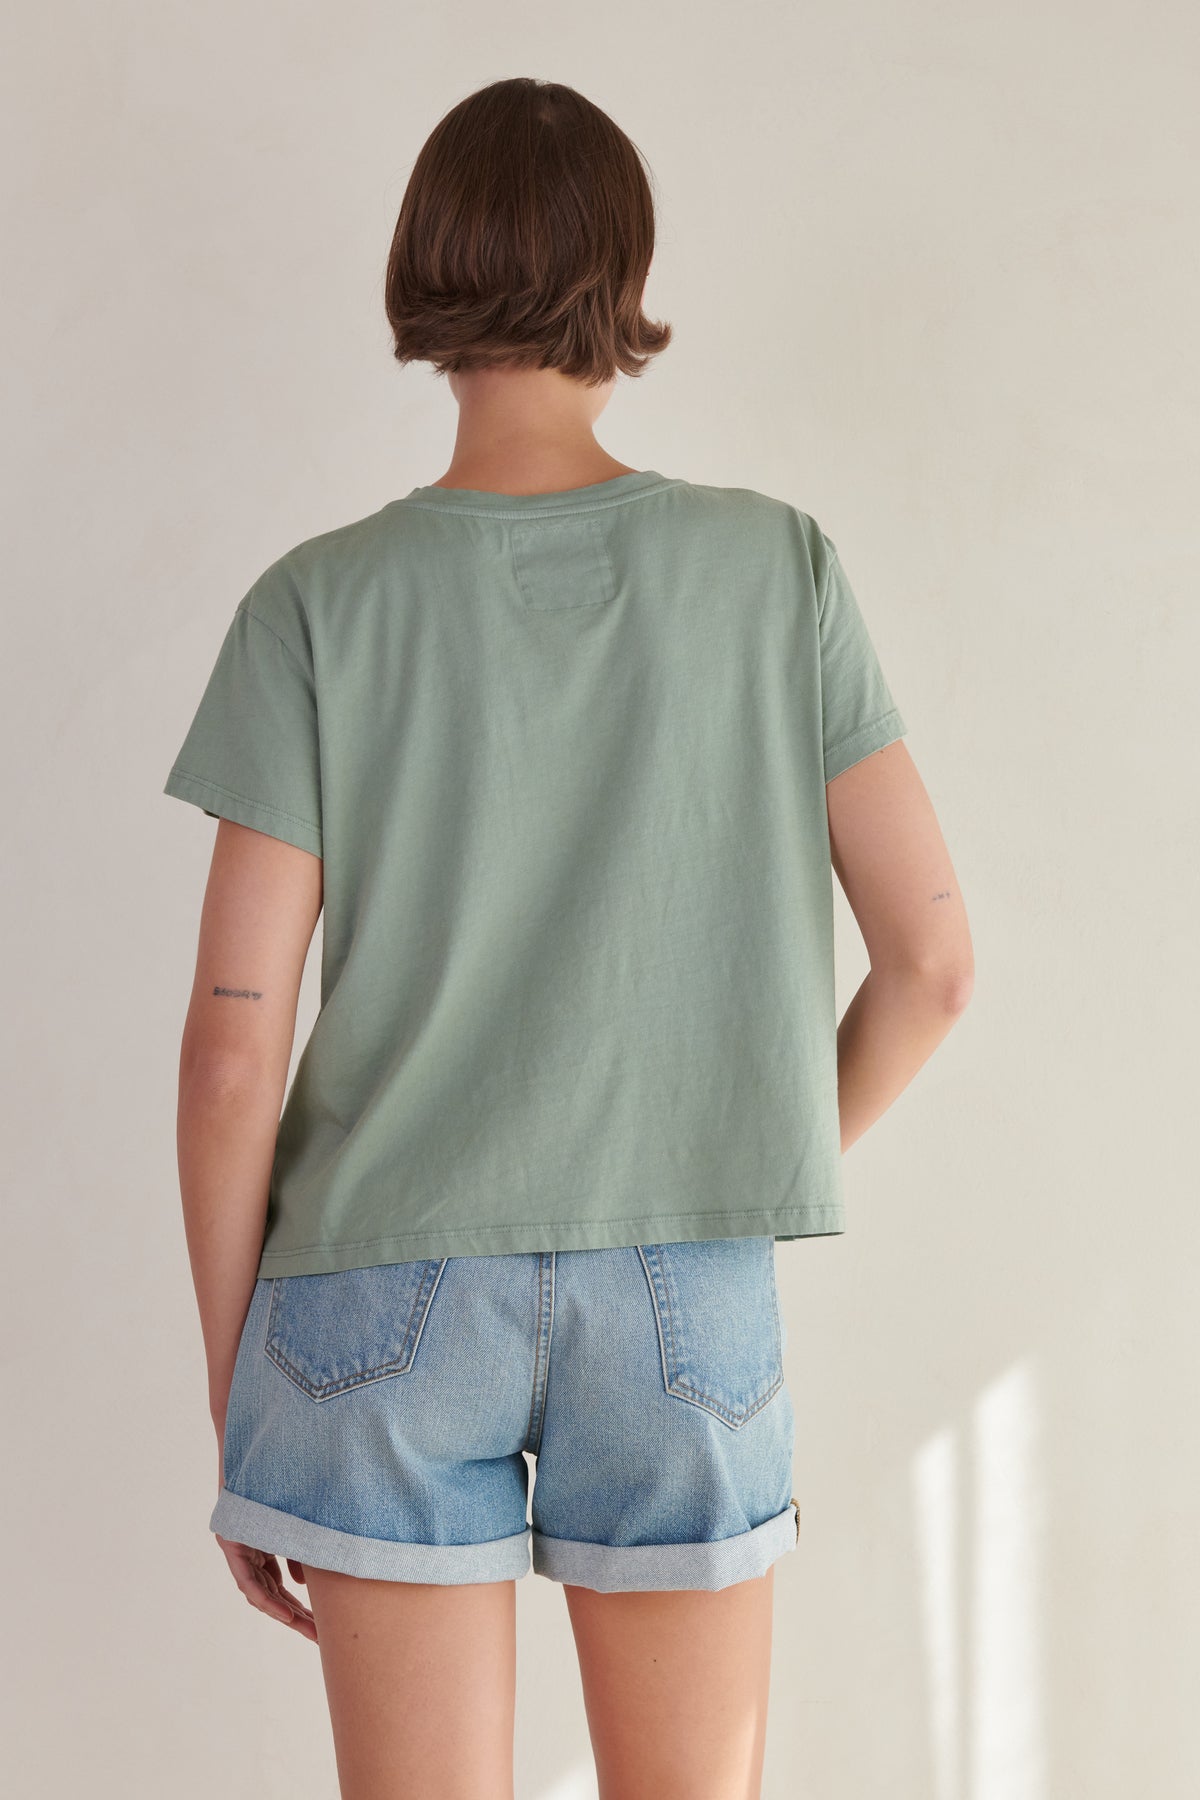 the back view of a woman wearing denim shorts and a Velvet by Jenny Graham TOPANGA TEE.-26403955310785